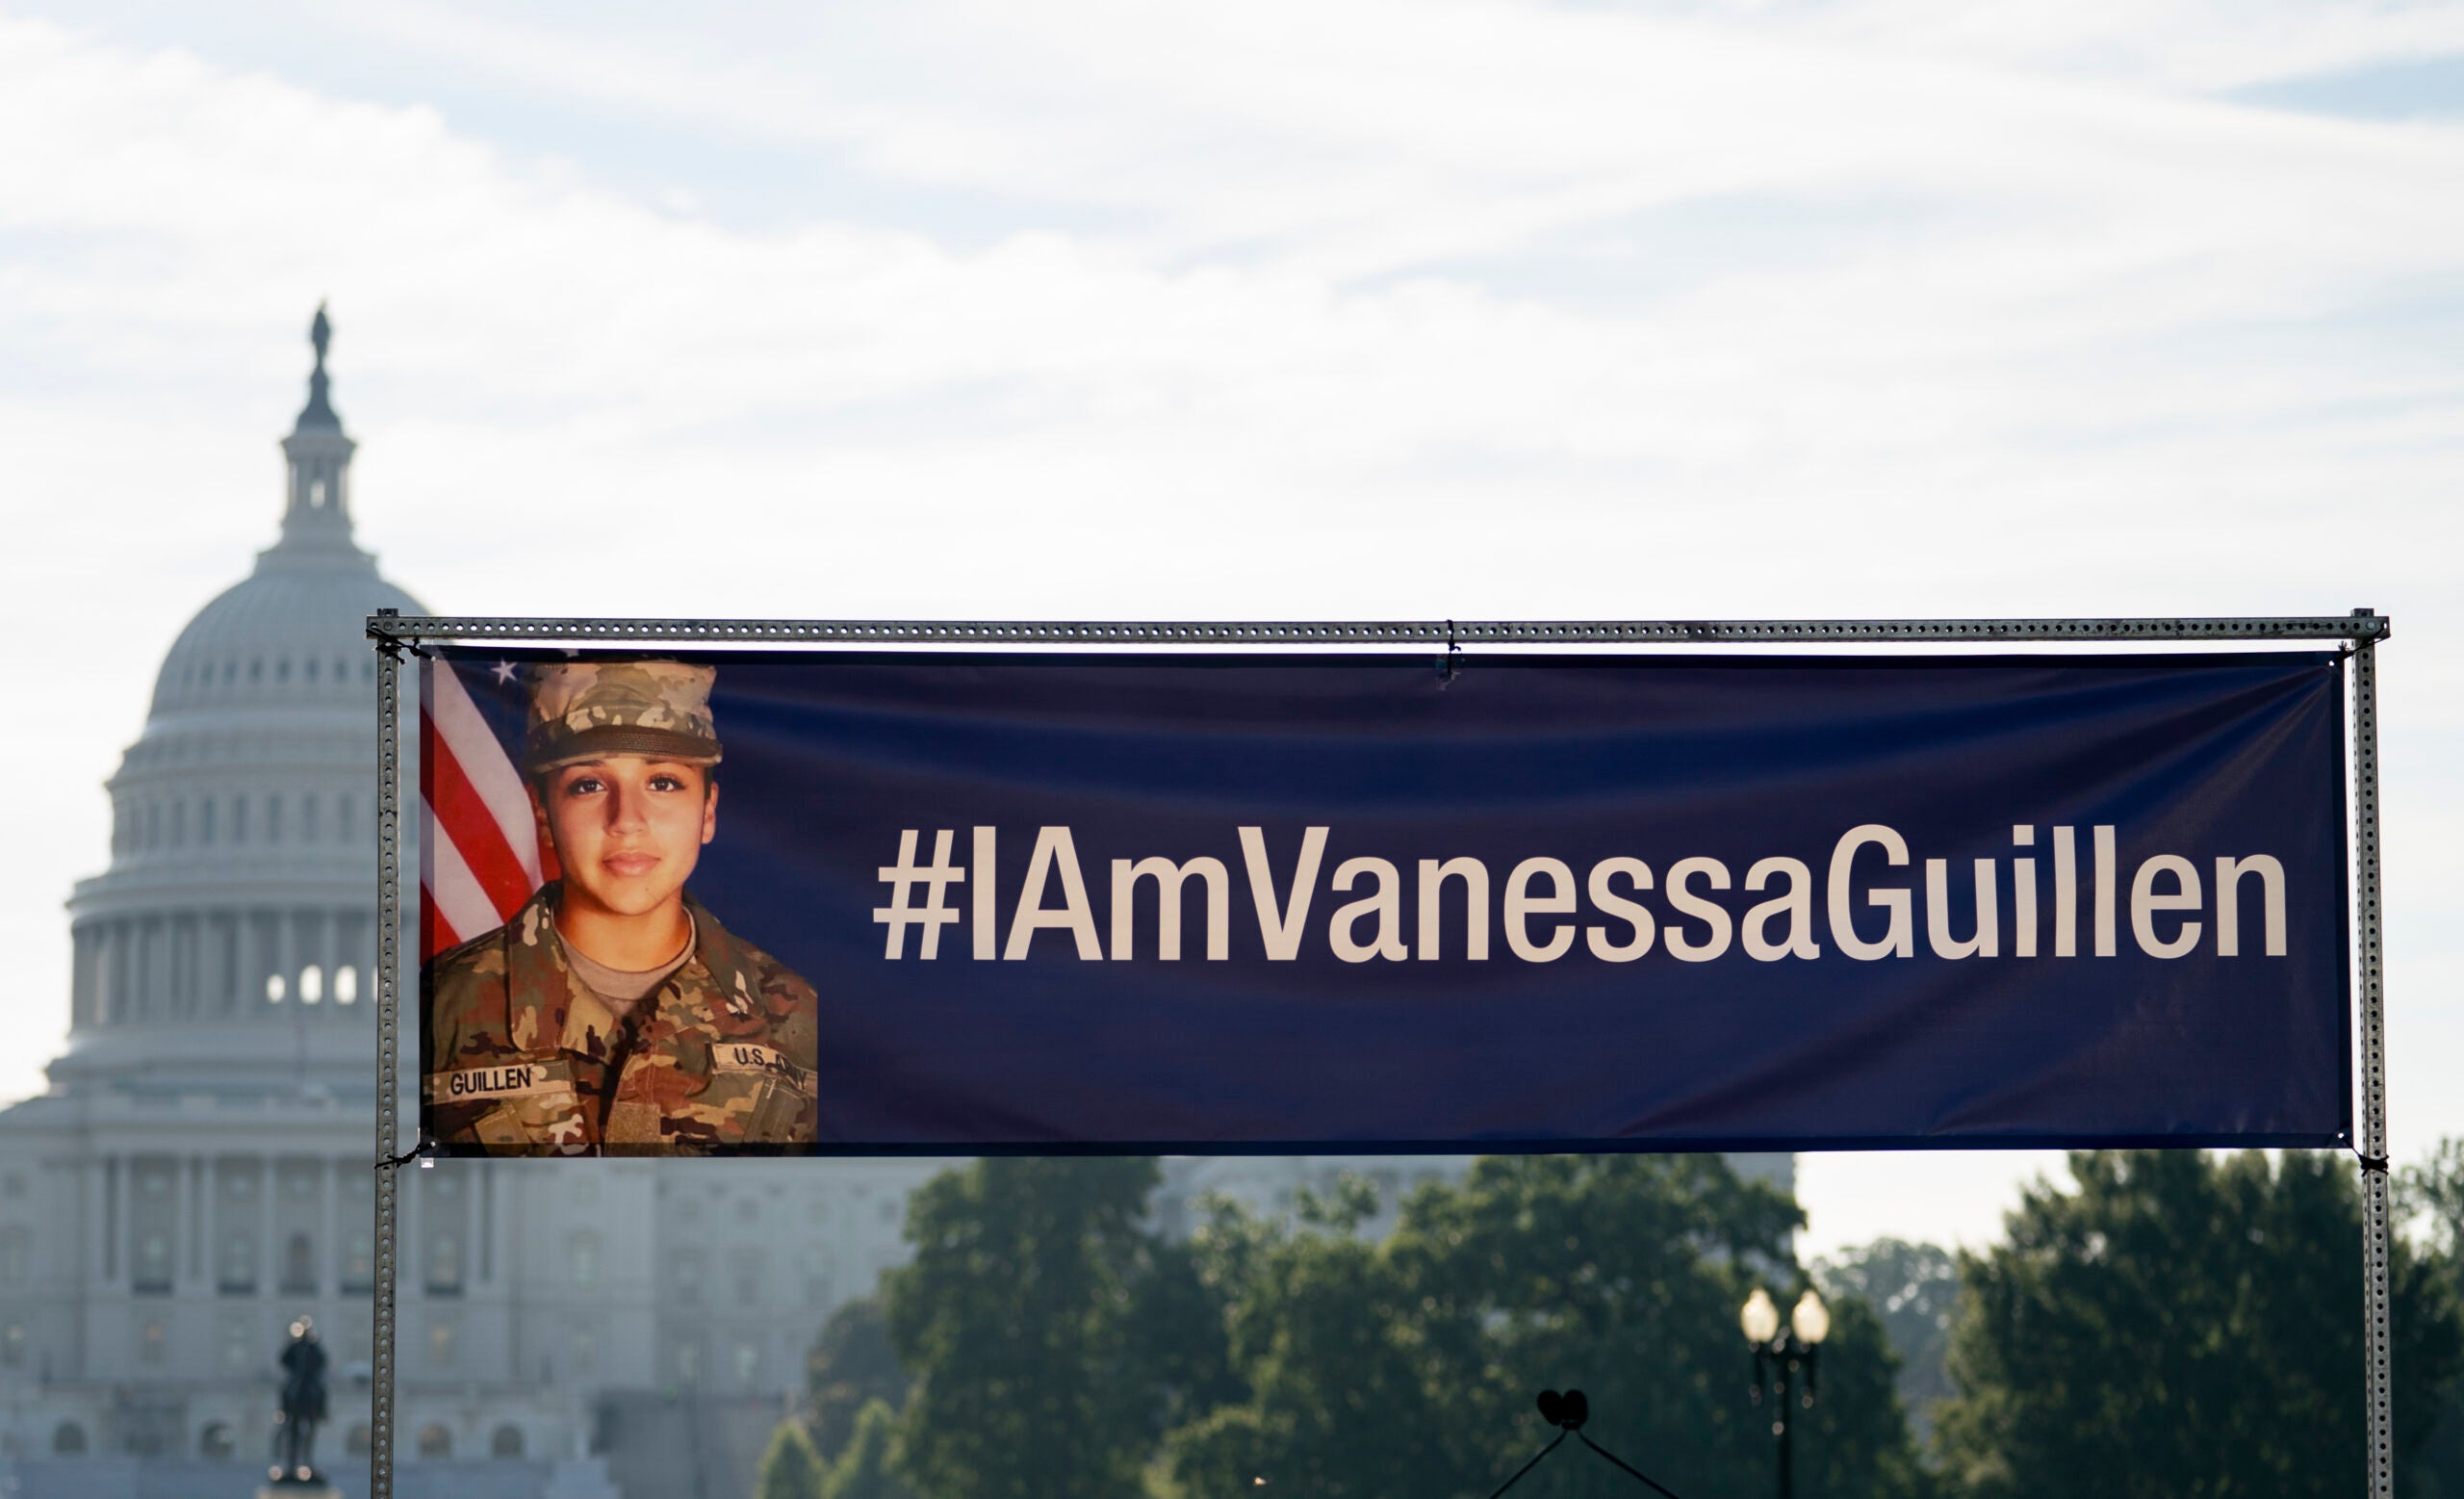 New Army report confirms Vanessa Guillén was sexually harassed by a member of her unit before her death